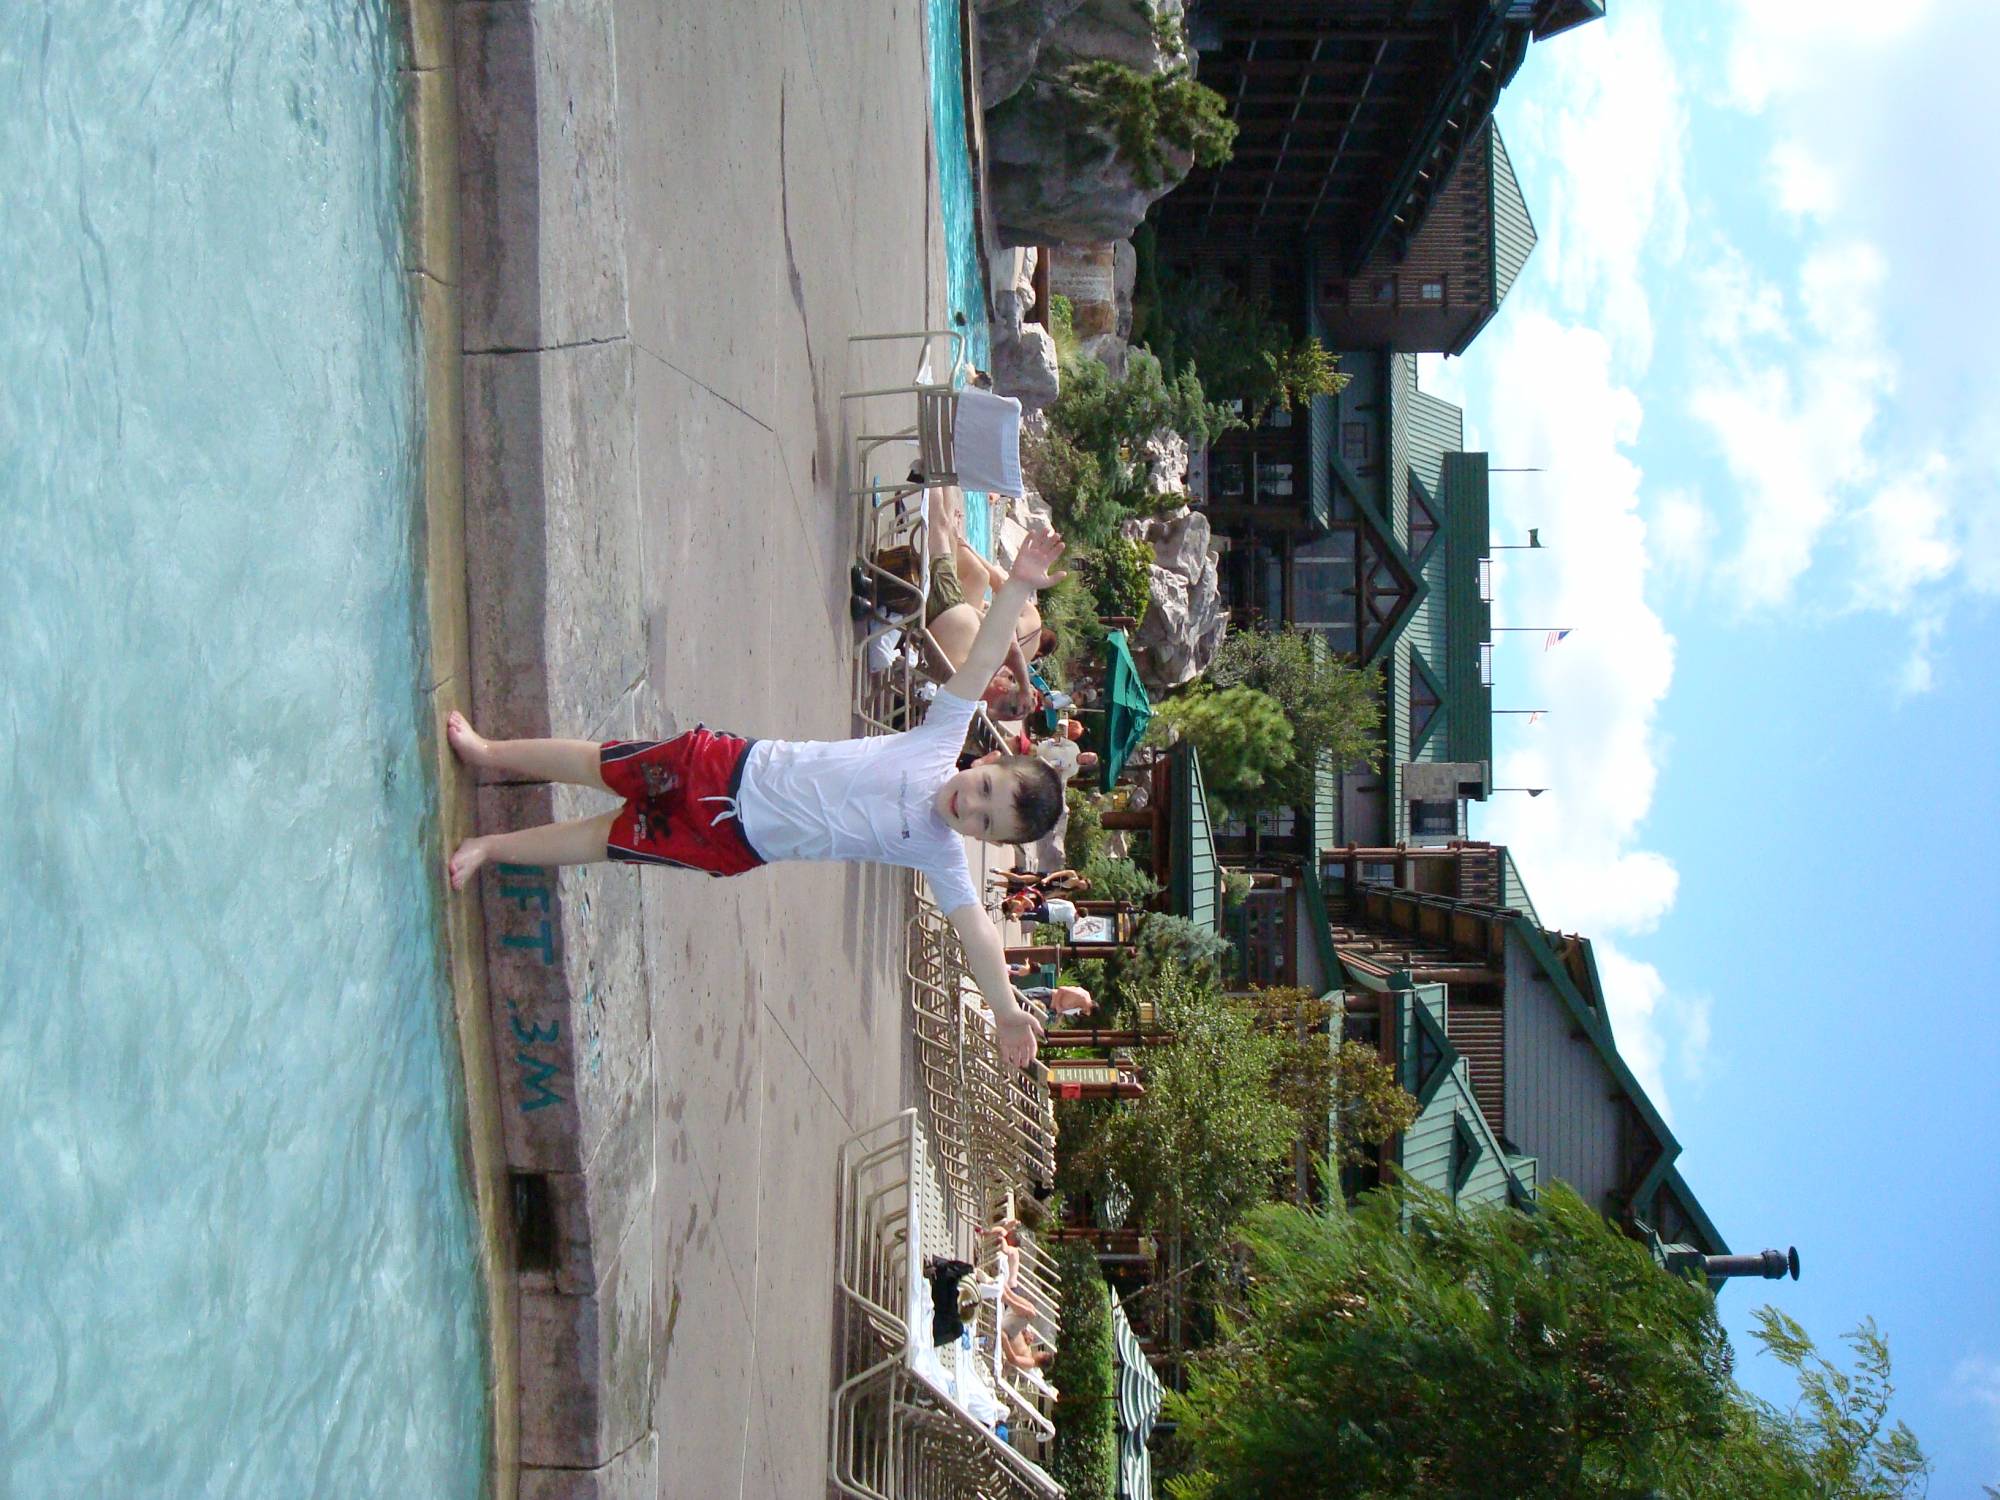 By the Wilderness Lodge wading pool